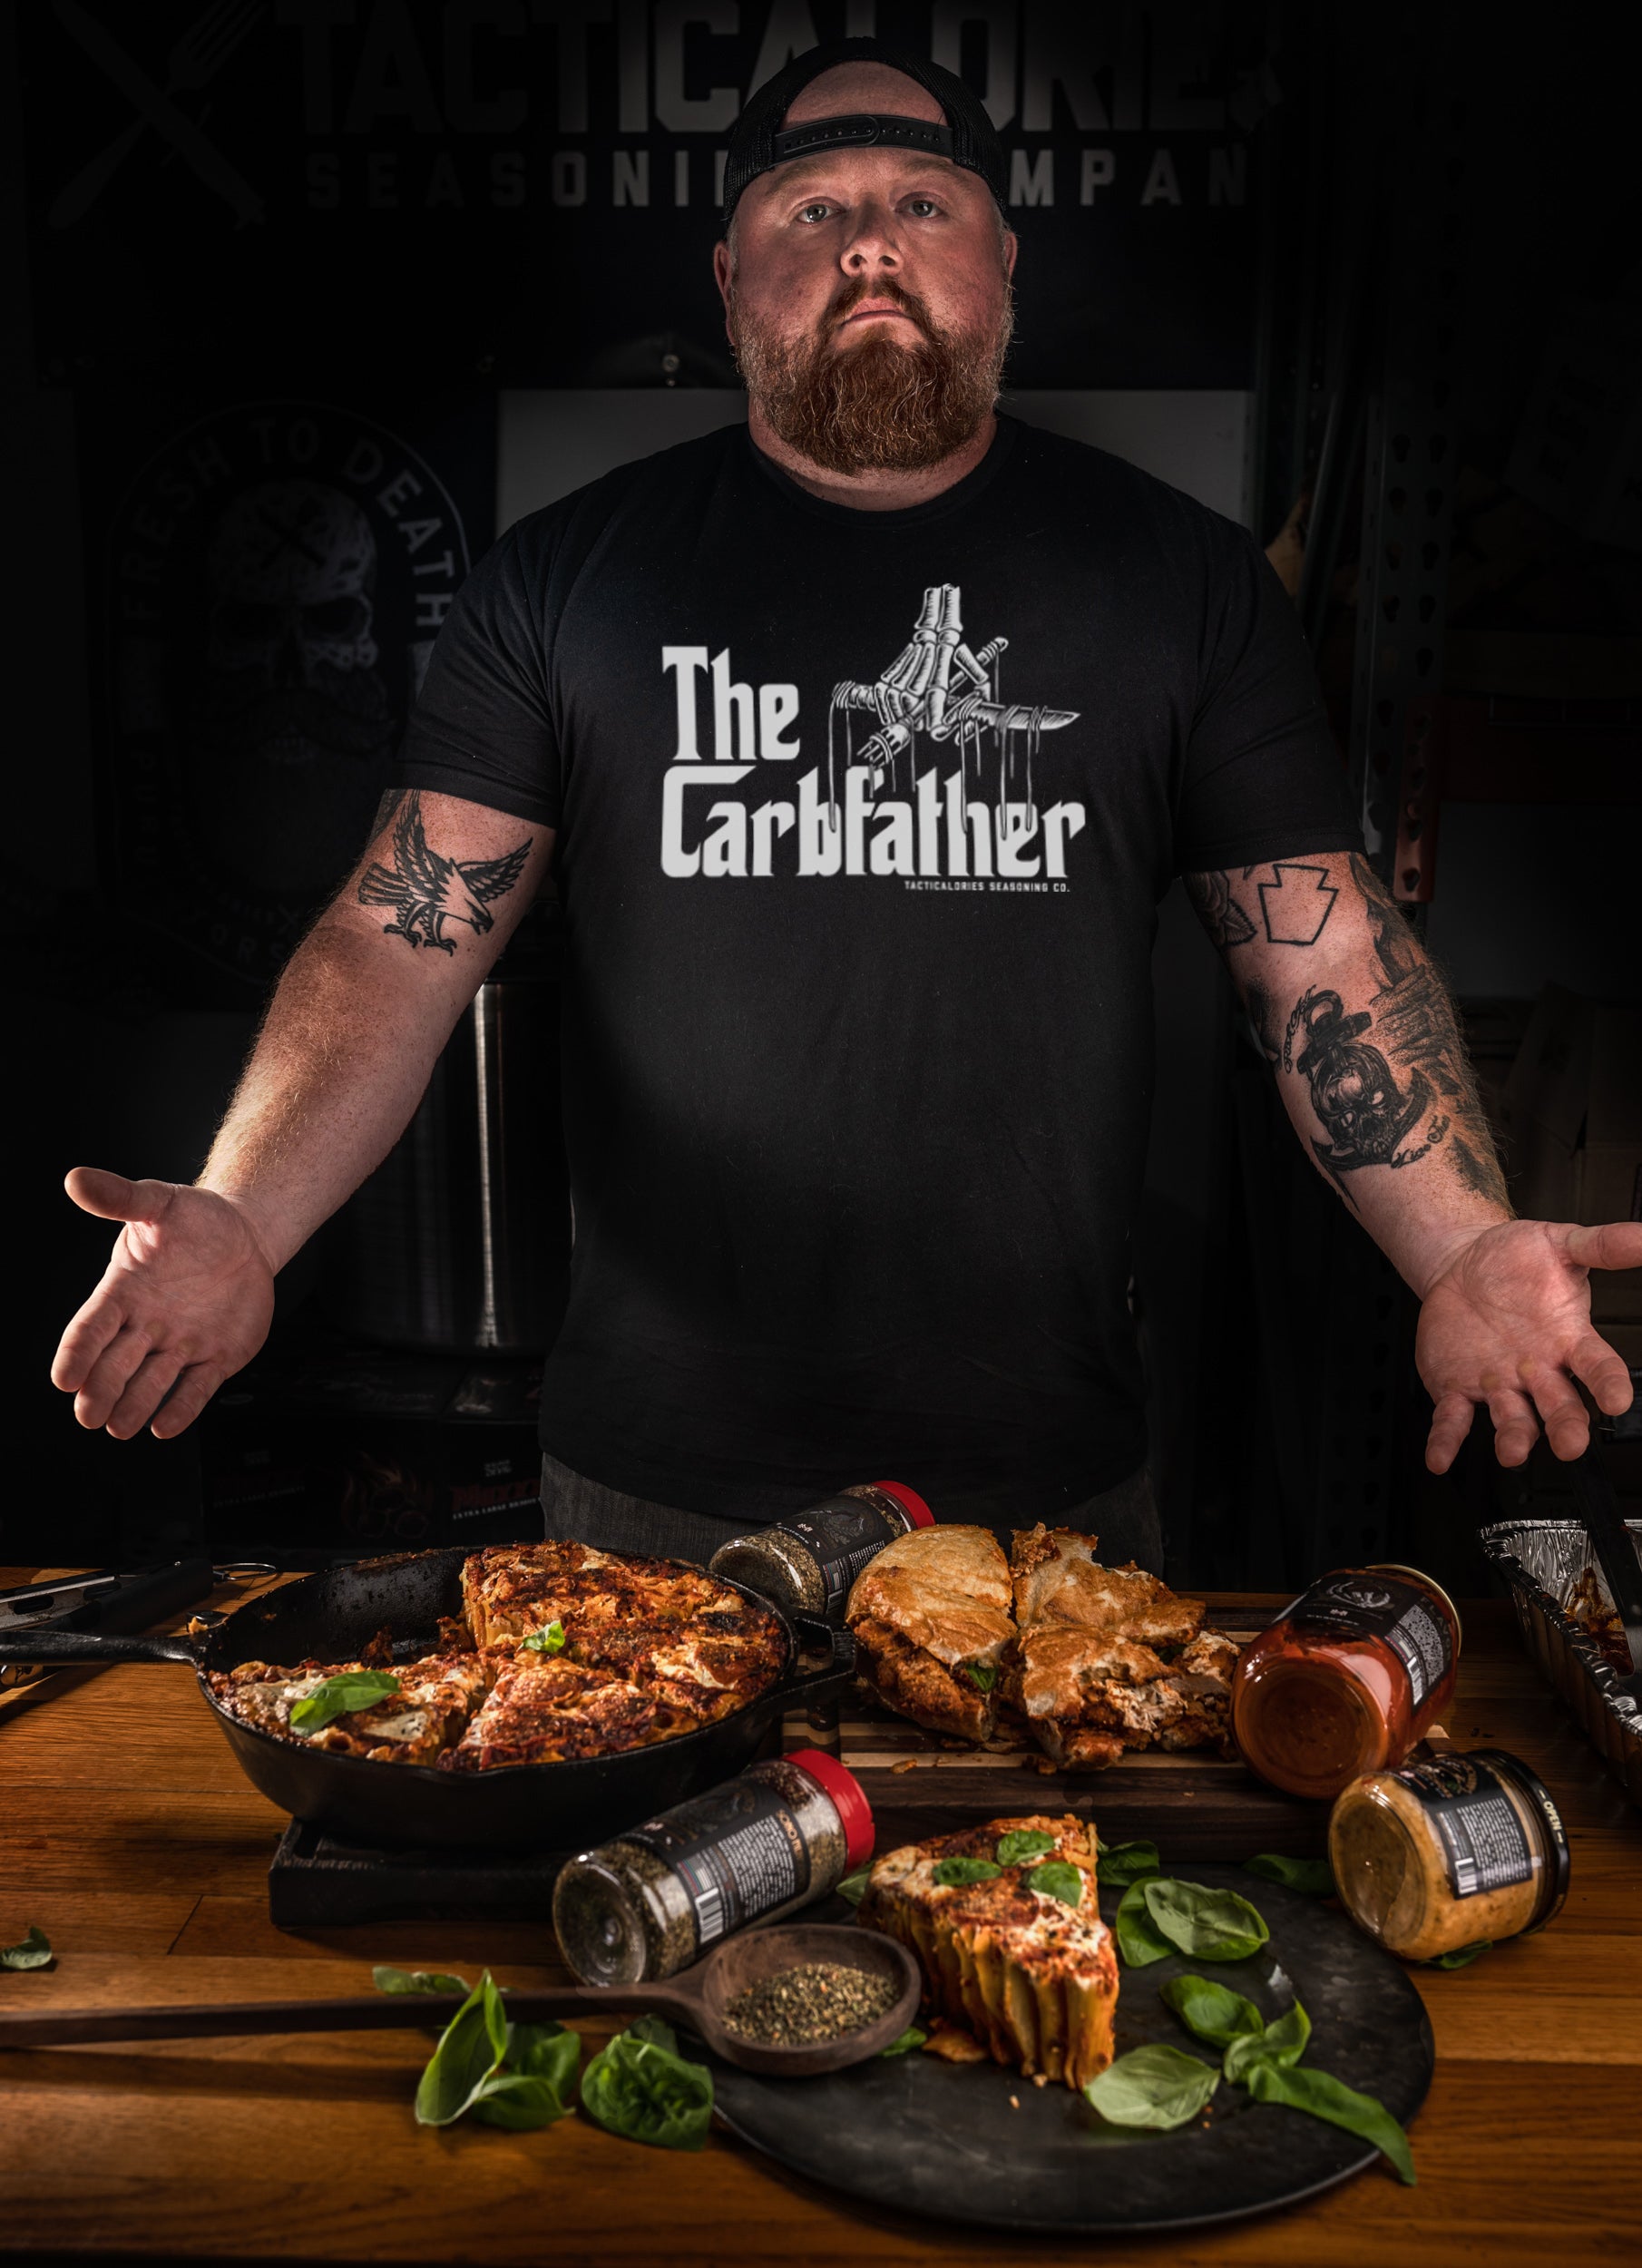 THE CARBFATHER | Locally Screen Printed Premium Tri-Blend Shirt